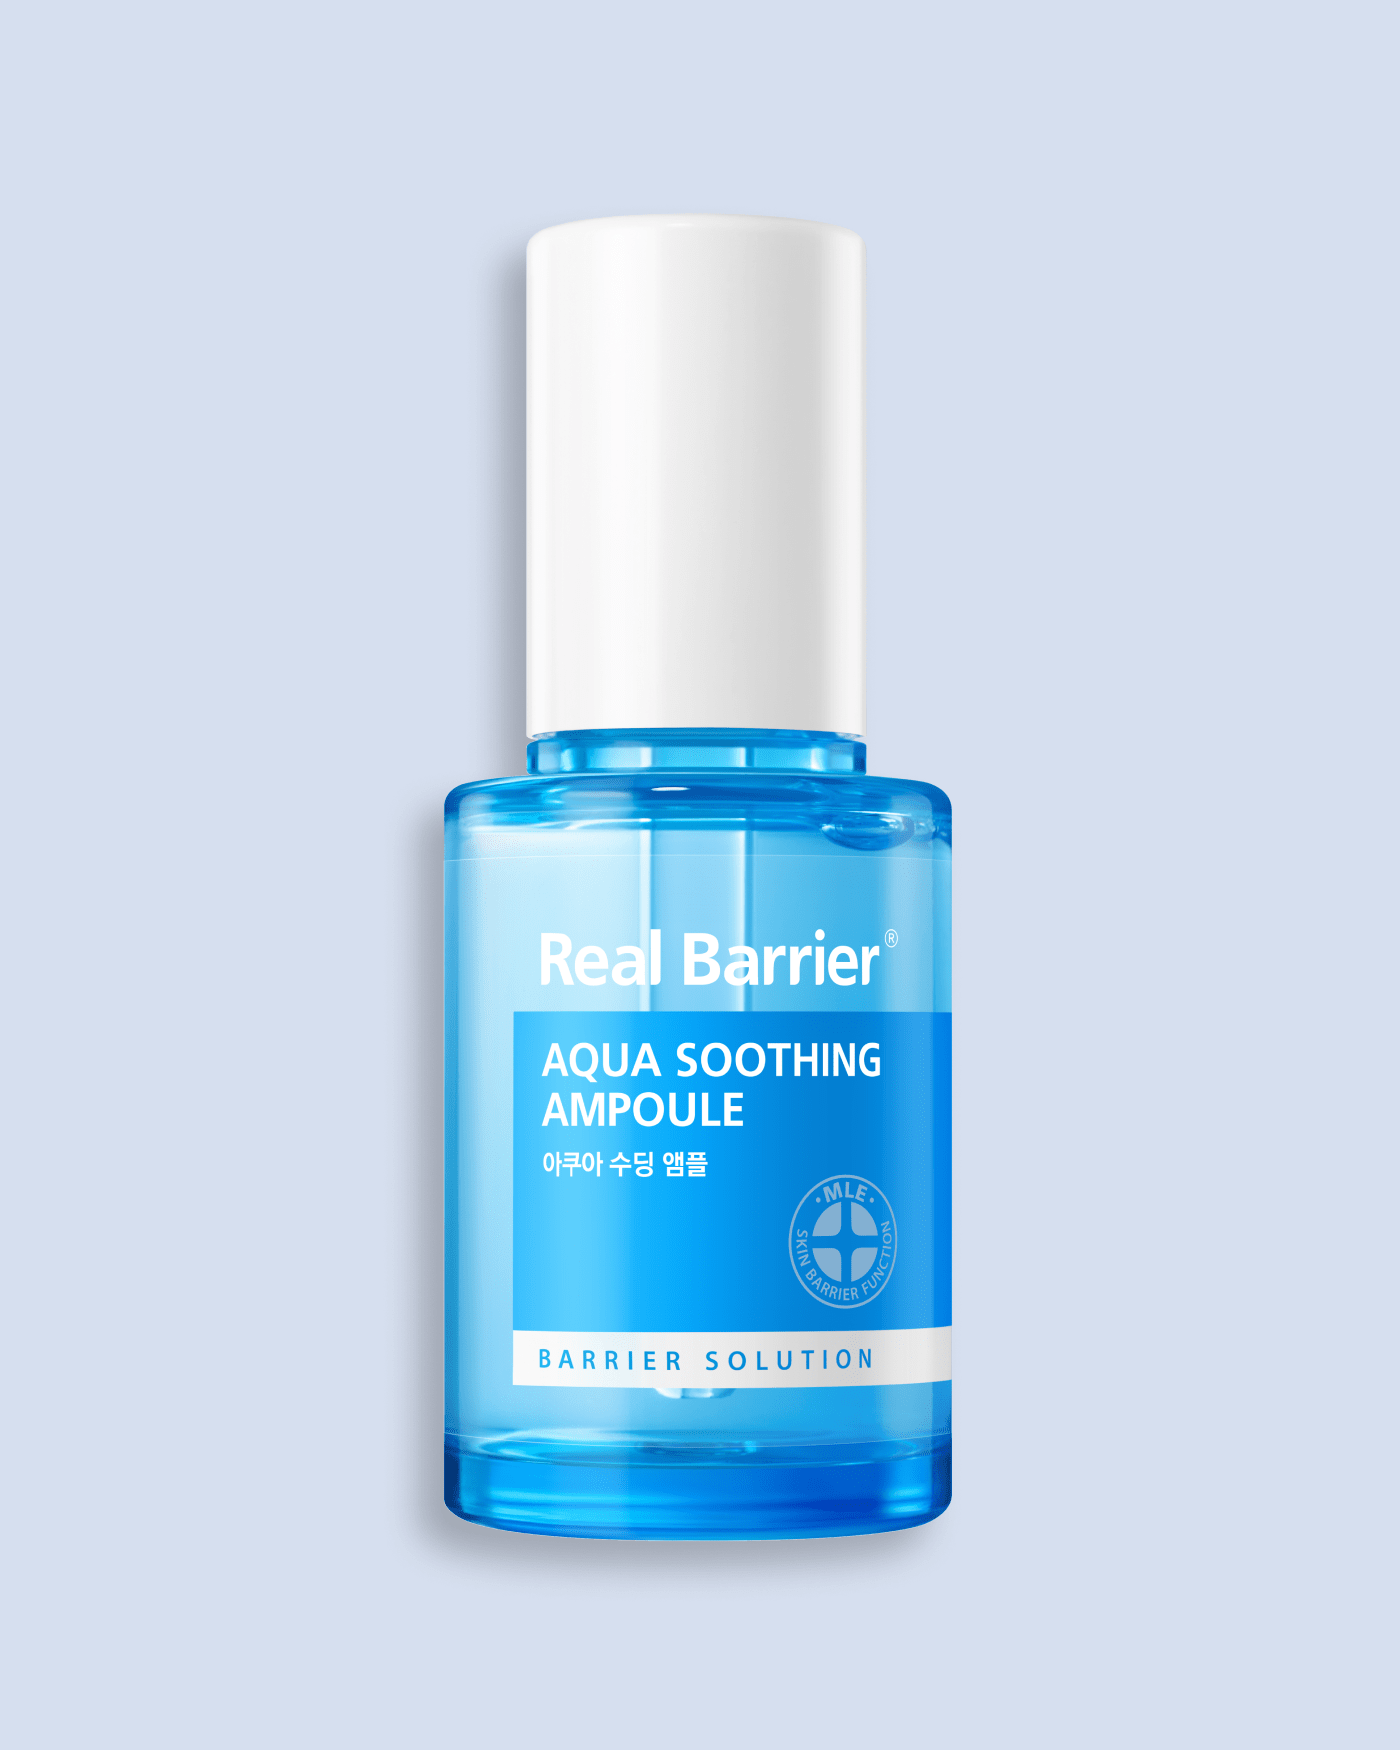 Aqua Soothing Ampoule Serum/Ampoule Real Barrier 